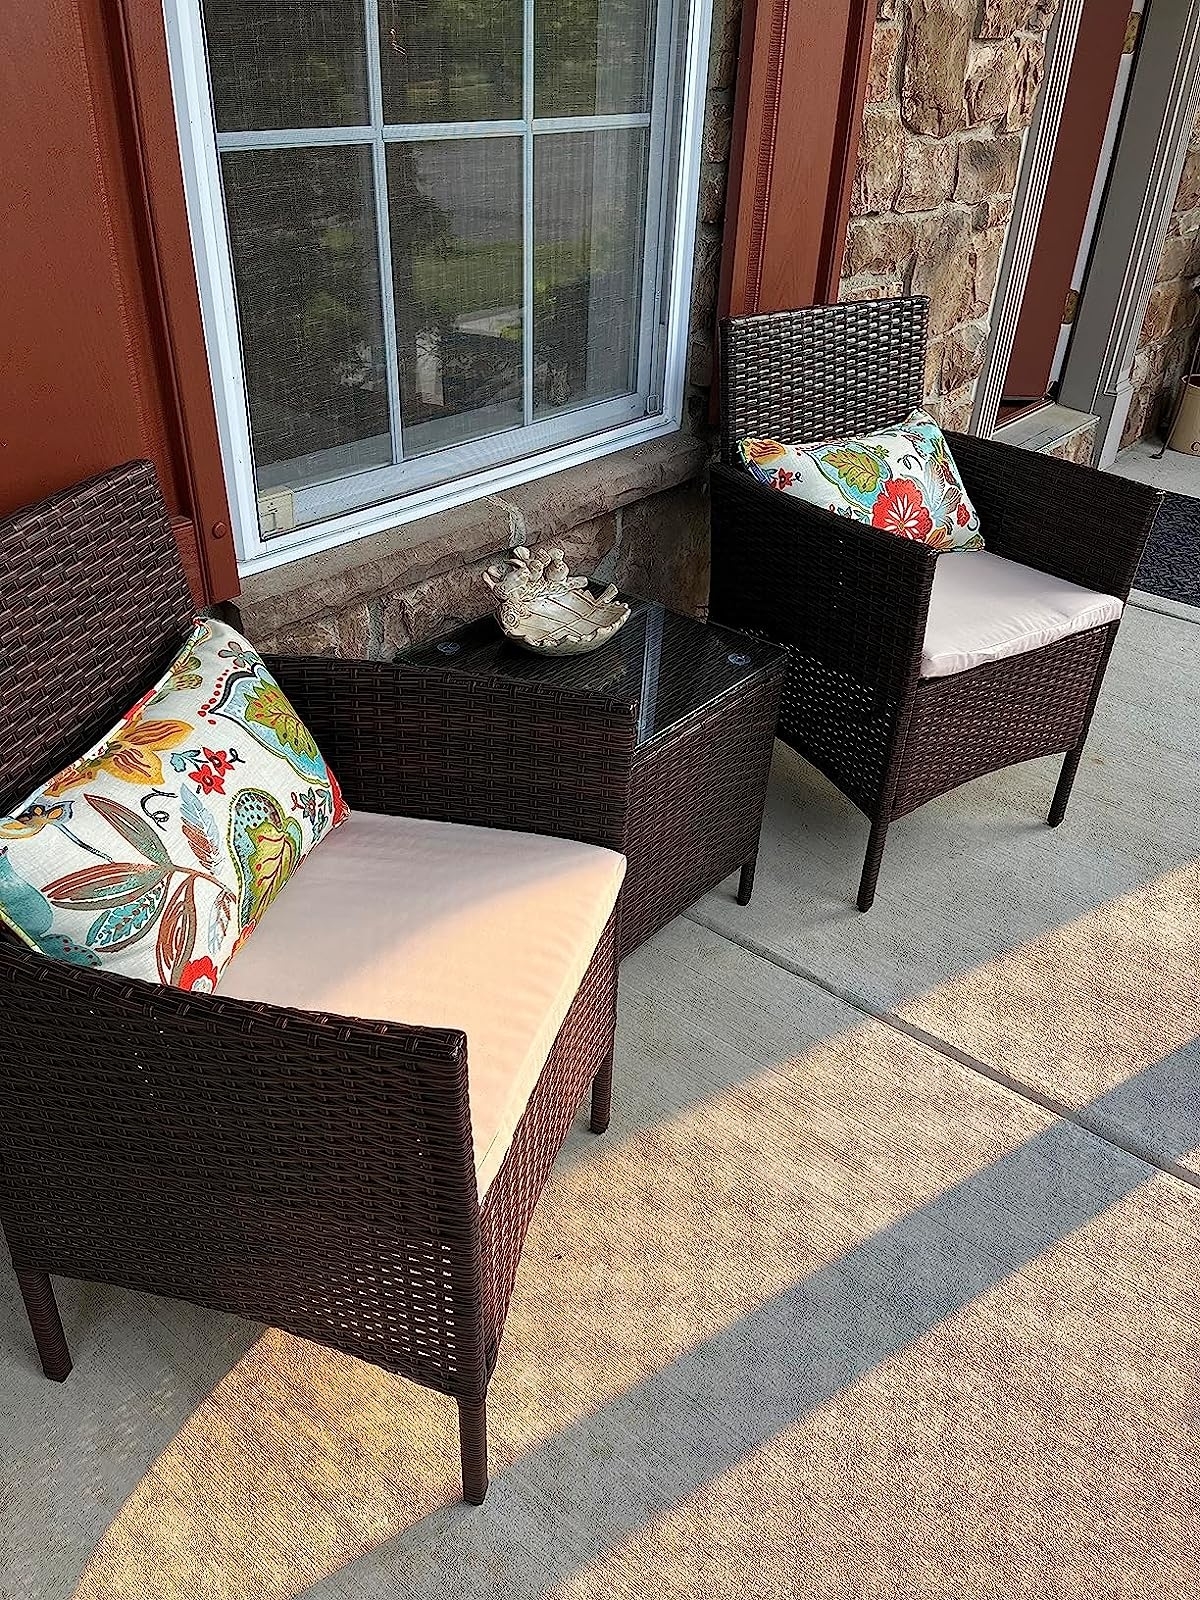 a reviewer photo of the brown wicker table and chairs on a decorated patio space